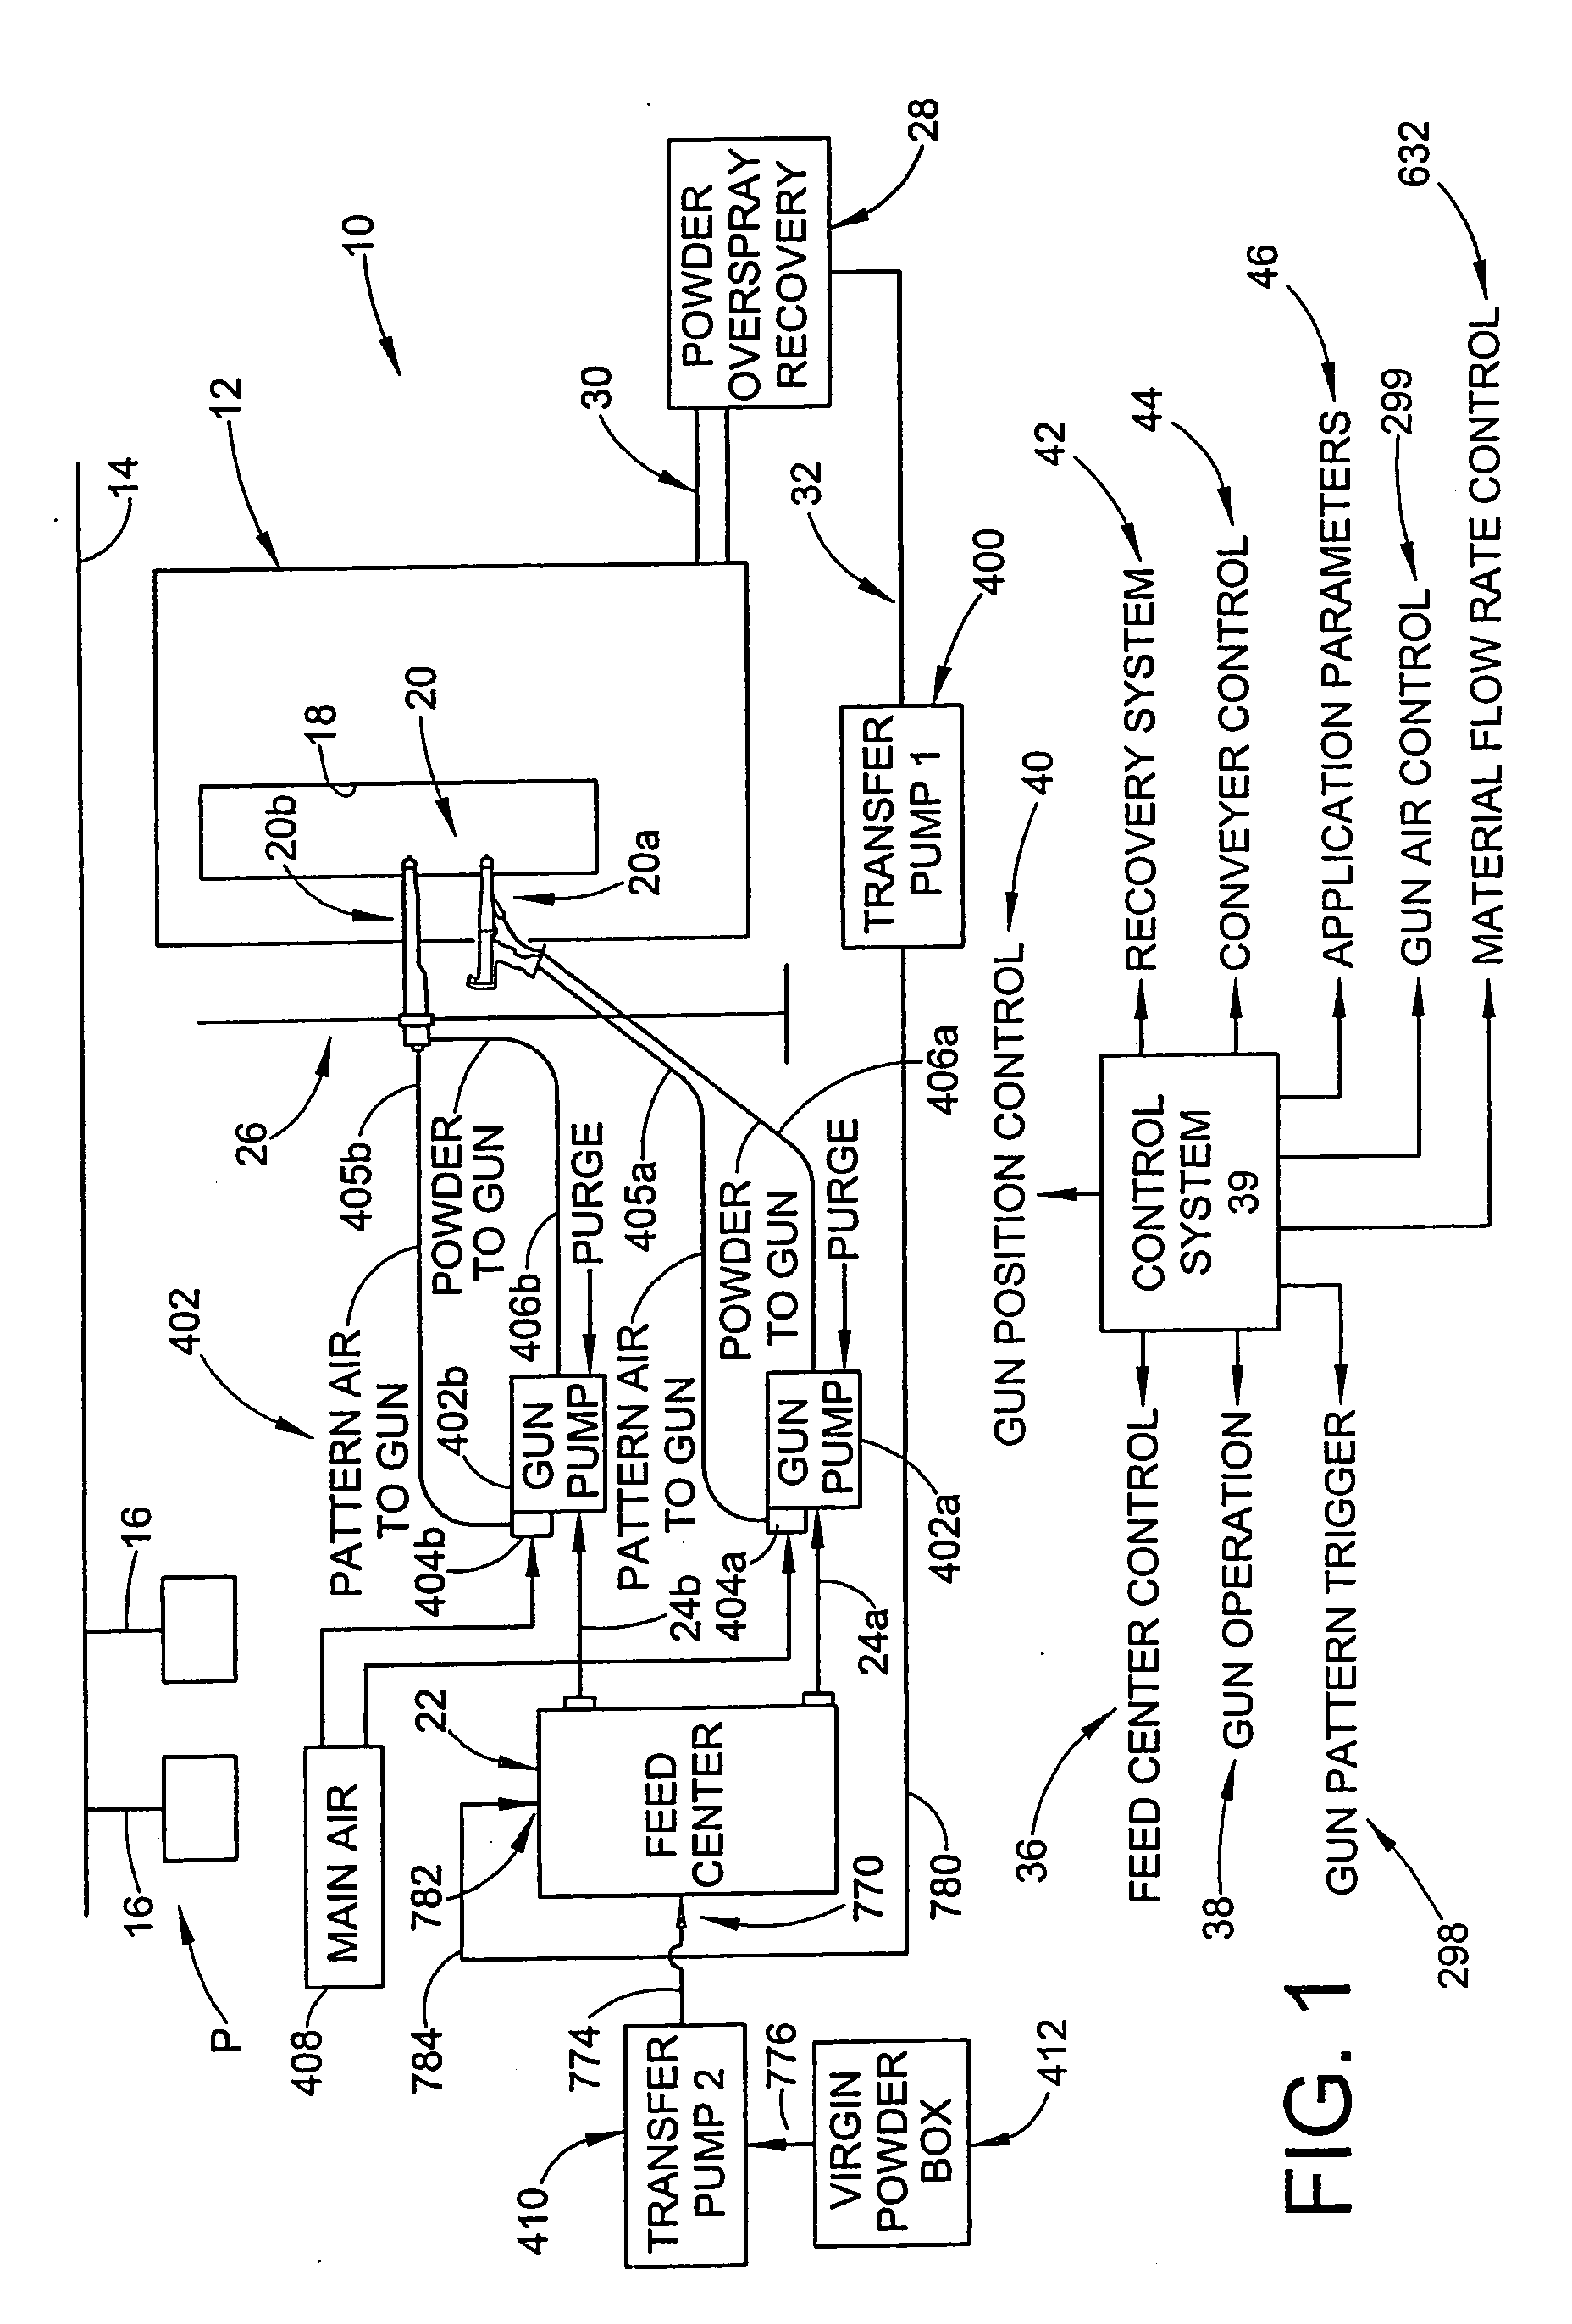 Particulate material applicator and pump